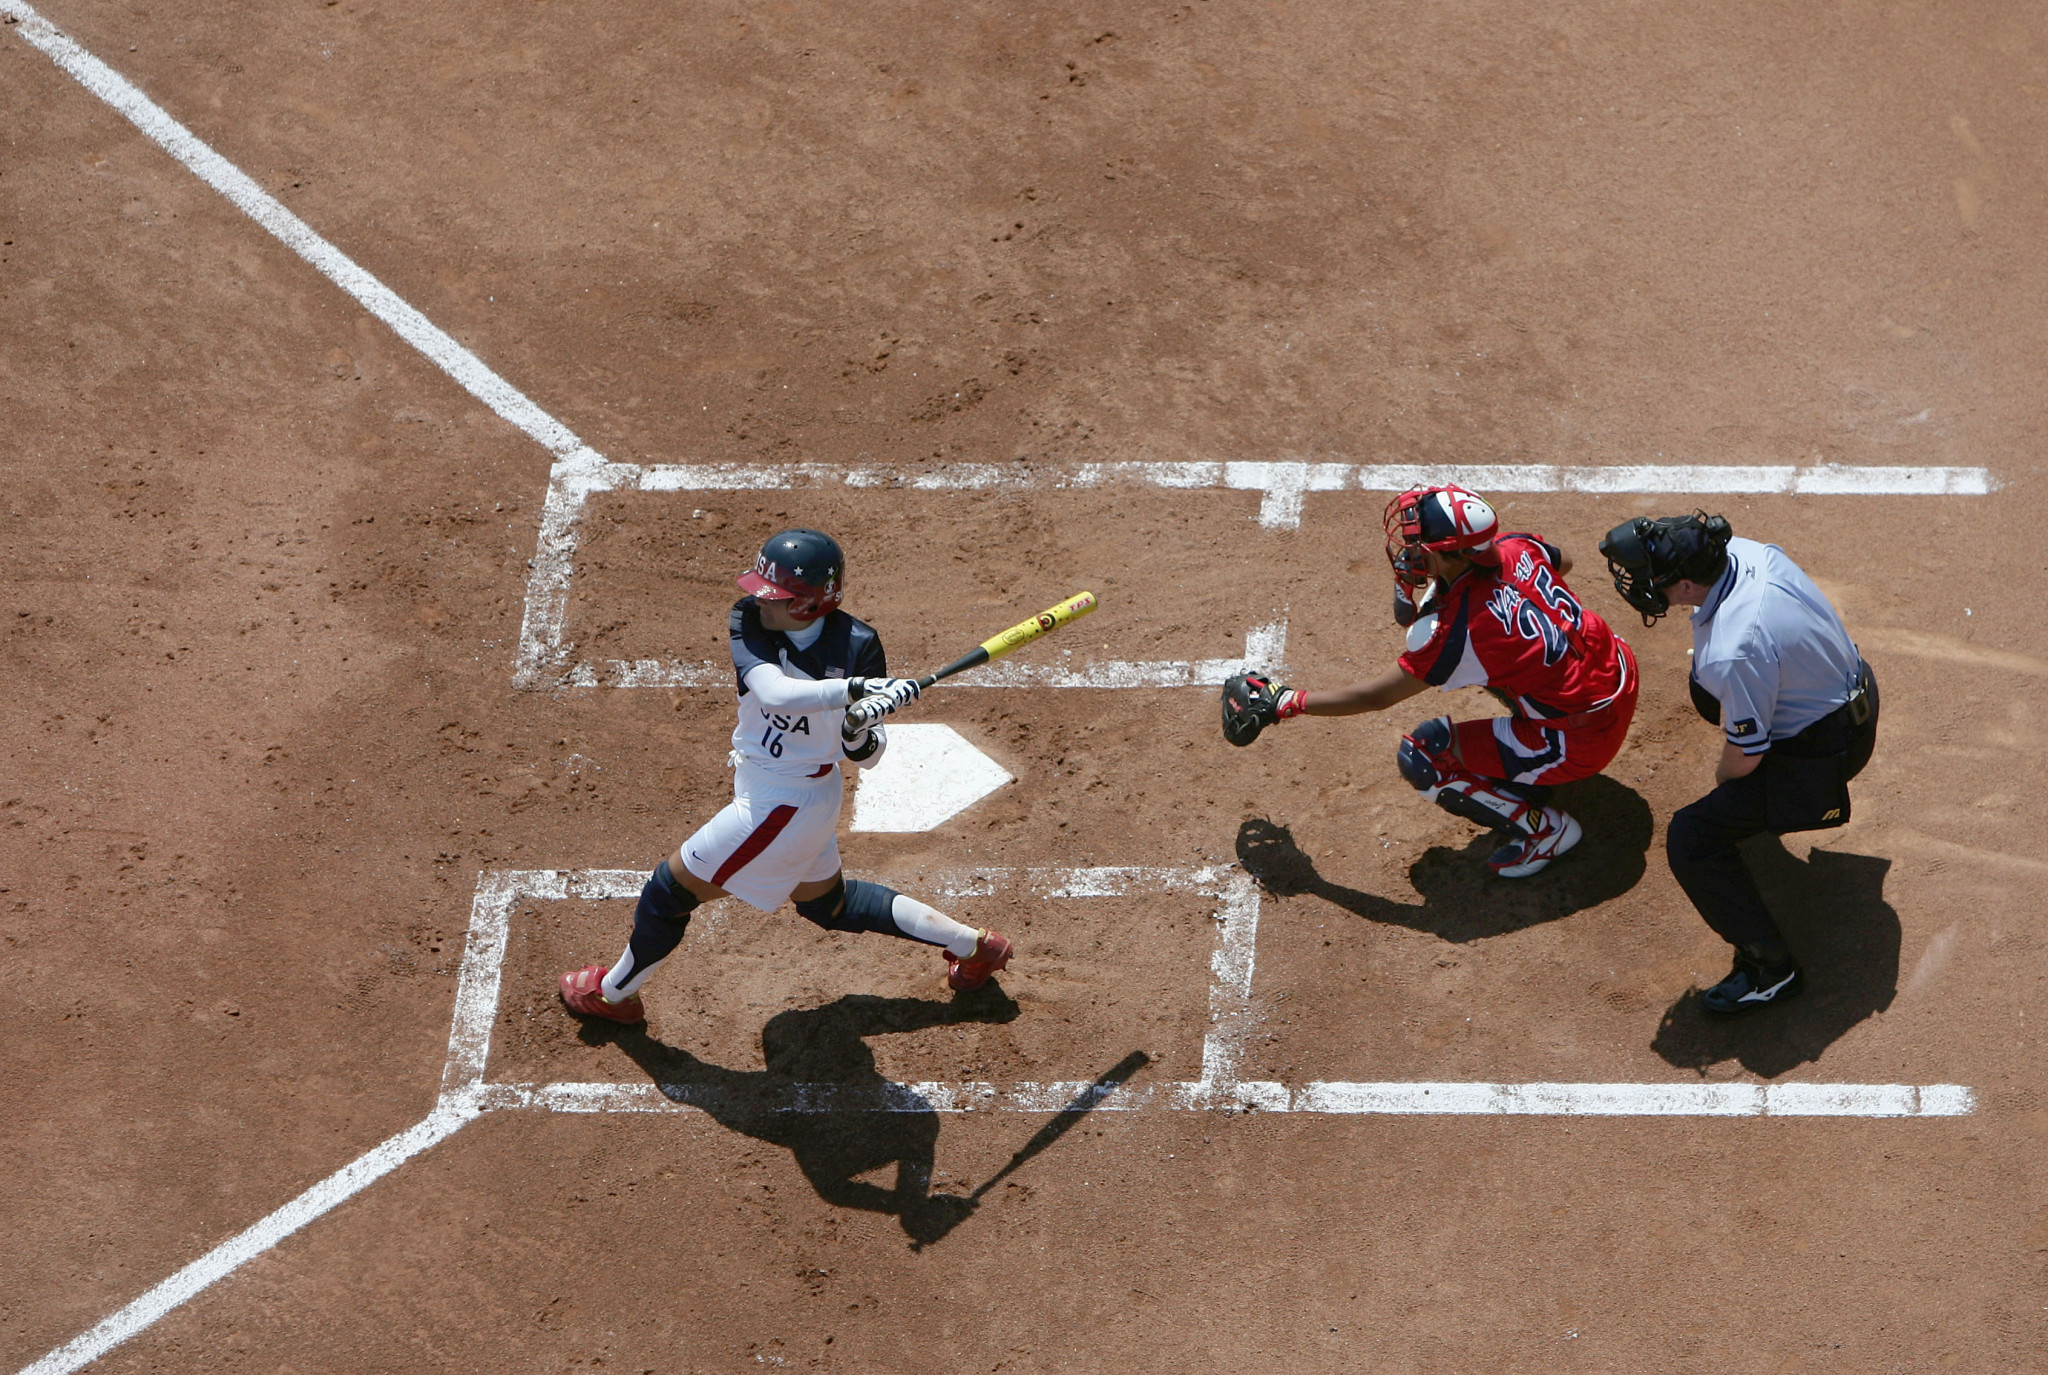 Peru to host workshop for female umpires in build-up to WBSC Under-18 Women's Softball World Cup